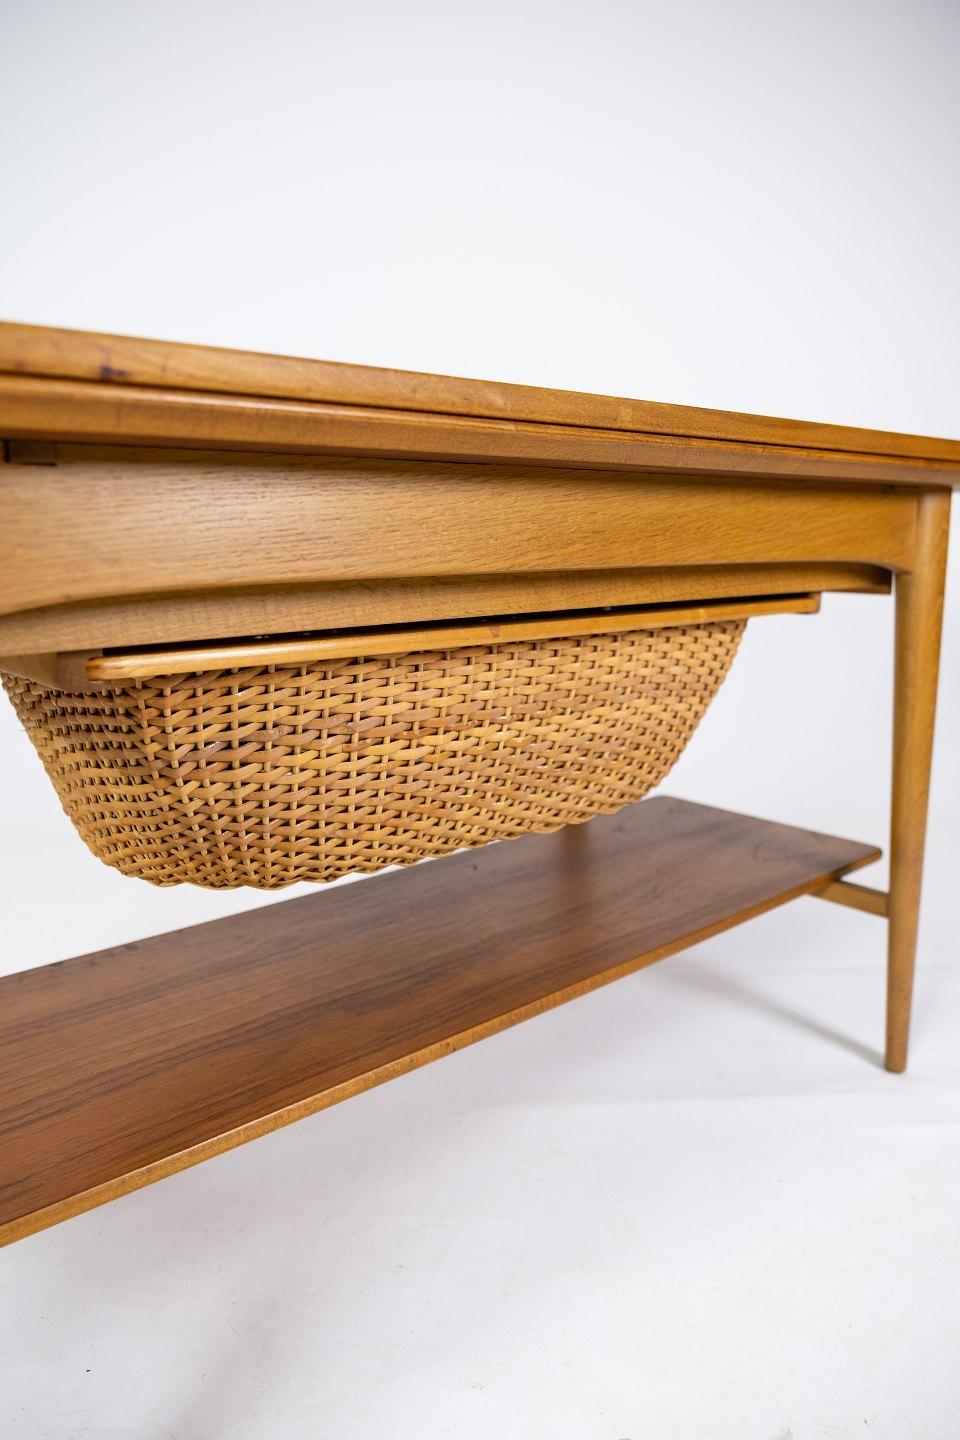 Mid-20th Century Coffee & Sewing Table Made In Oak & Teak, Danish Design From 1960s For Sale